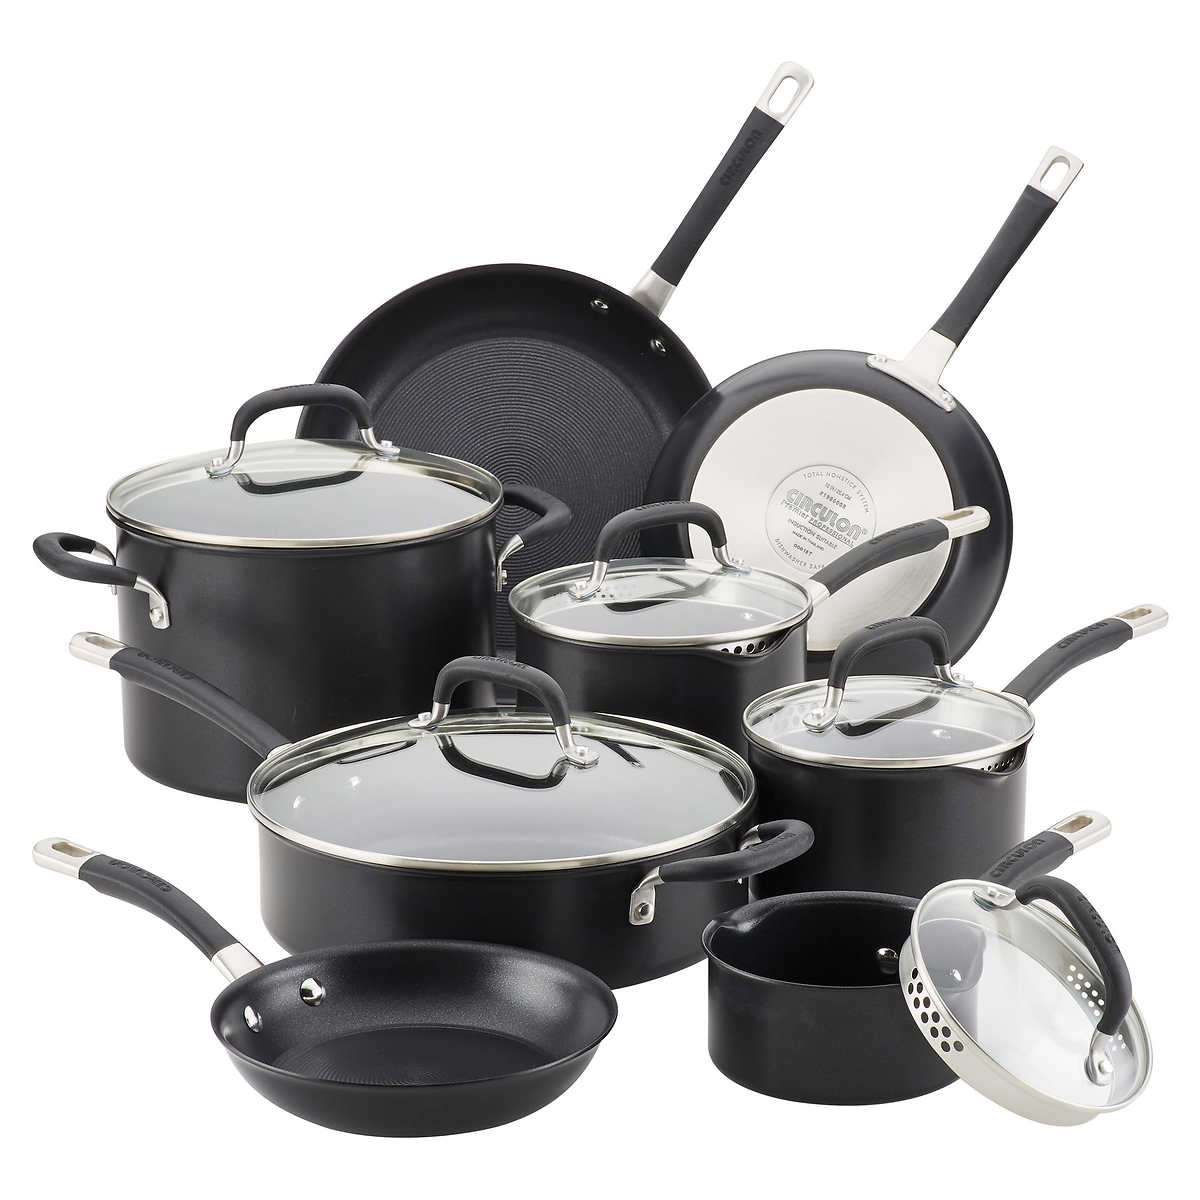 Circulon Premier Hard Anodised Induction 13 Piece Cookware Set in Black or  Bronz